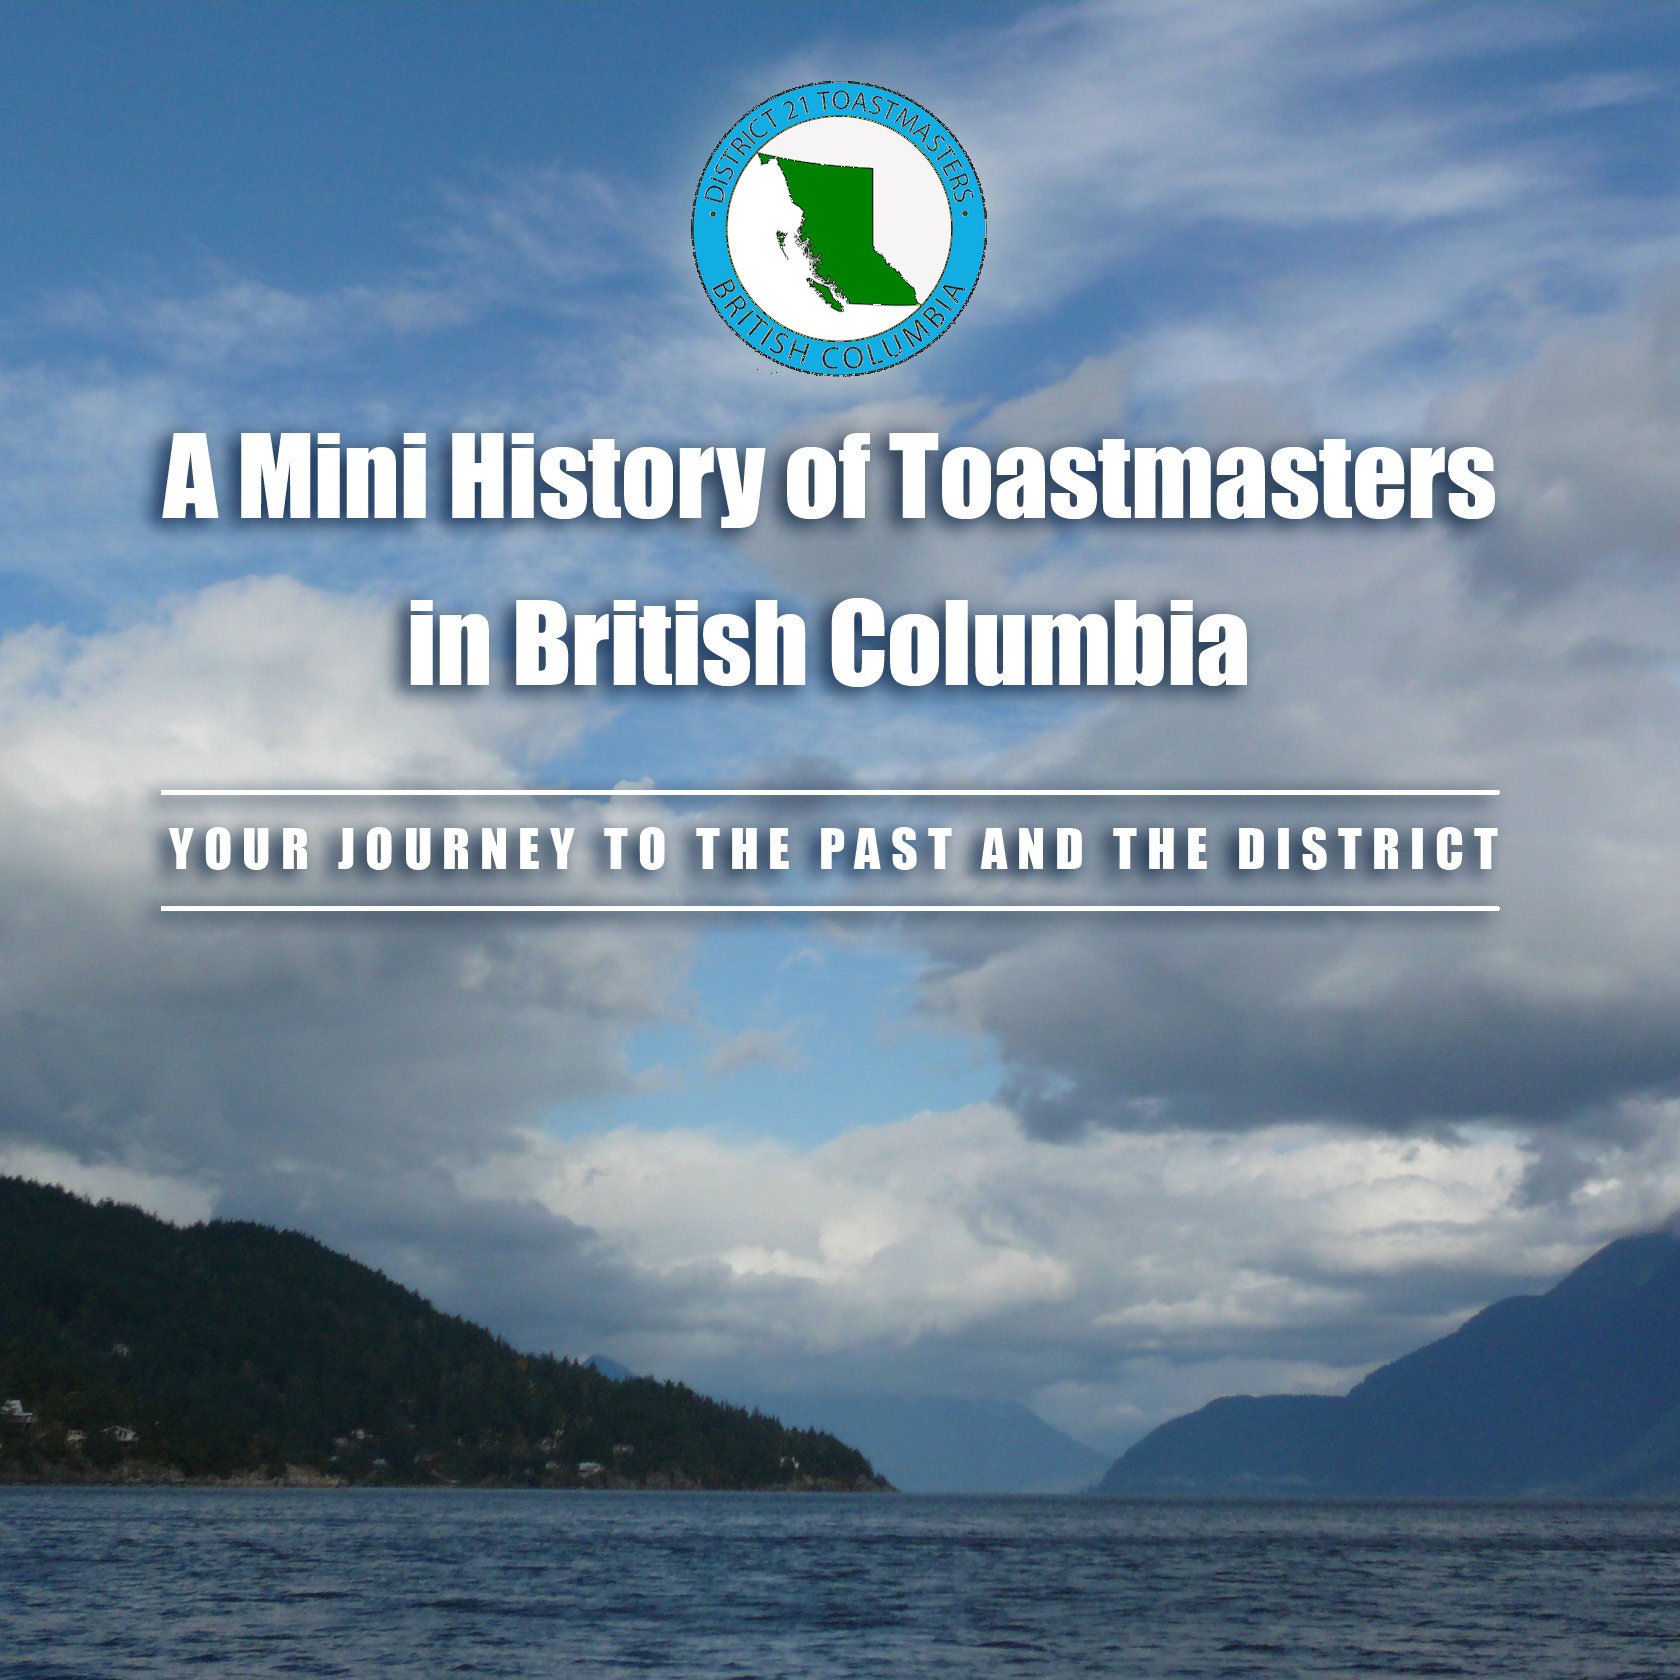 A Mini History of Toastmasters in British Columbia